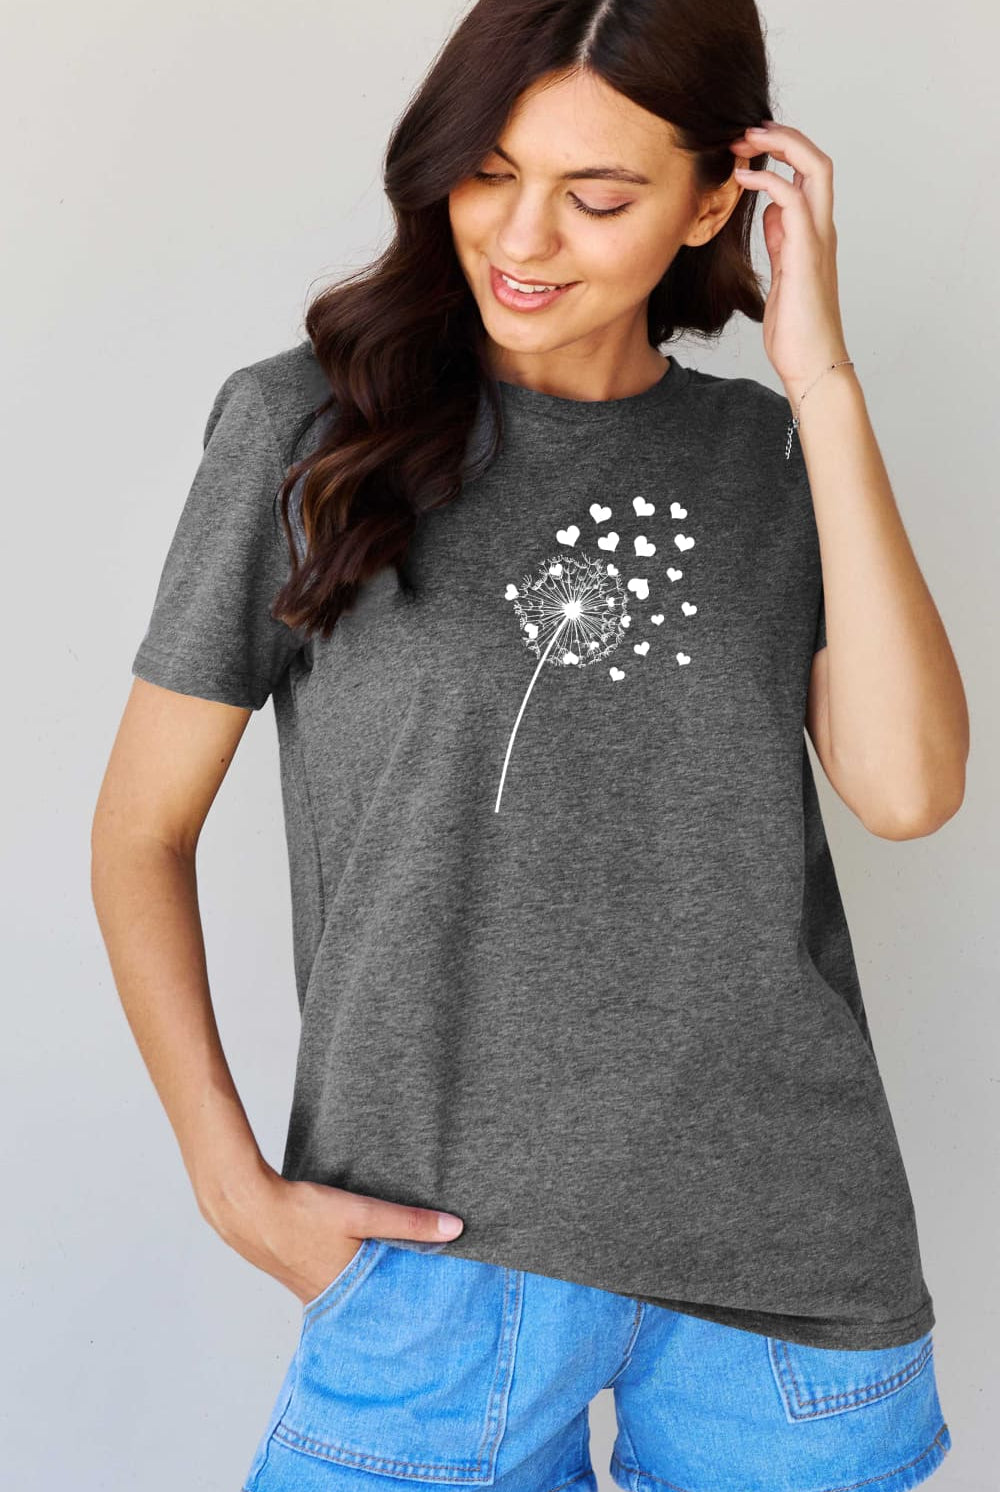 Gray Simply Love Full Size Dandelion Heart Graphic Cotton T-Shirt Graphic Tees